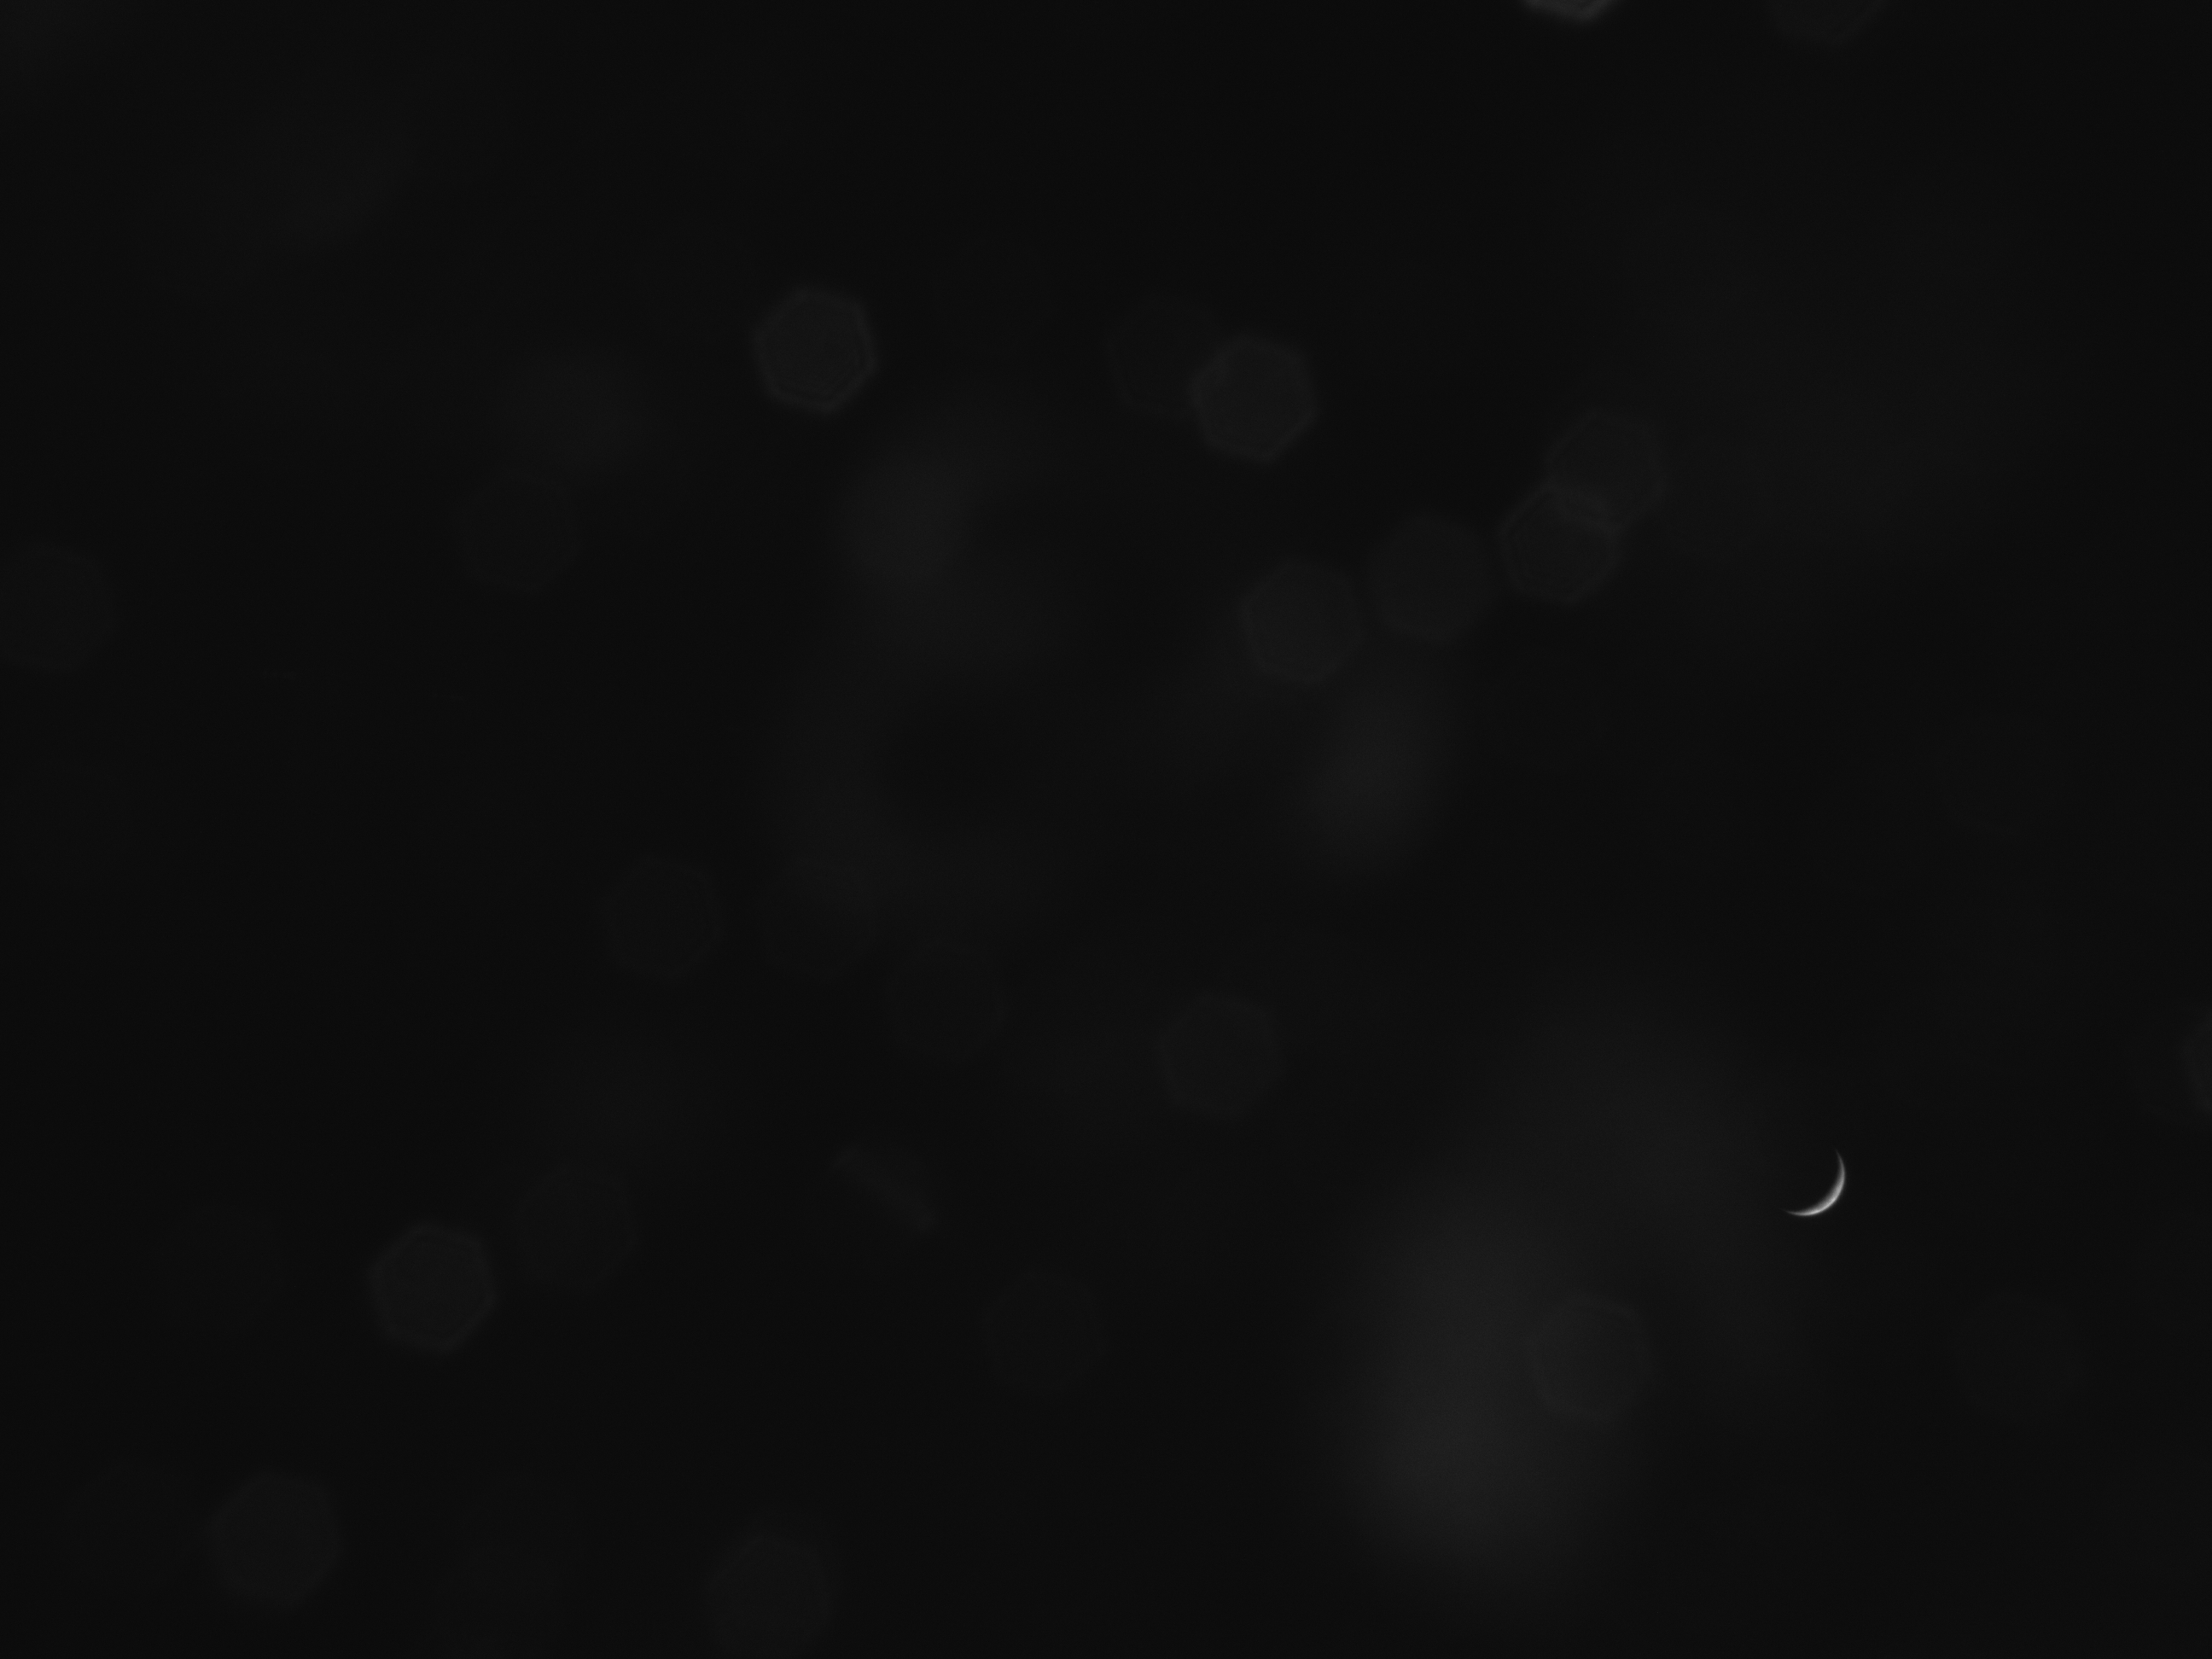 an all black image with a faint crescent moon near the bottom right corner.